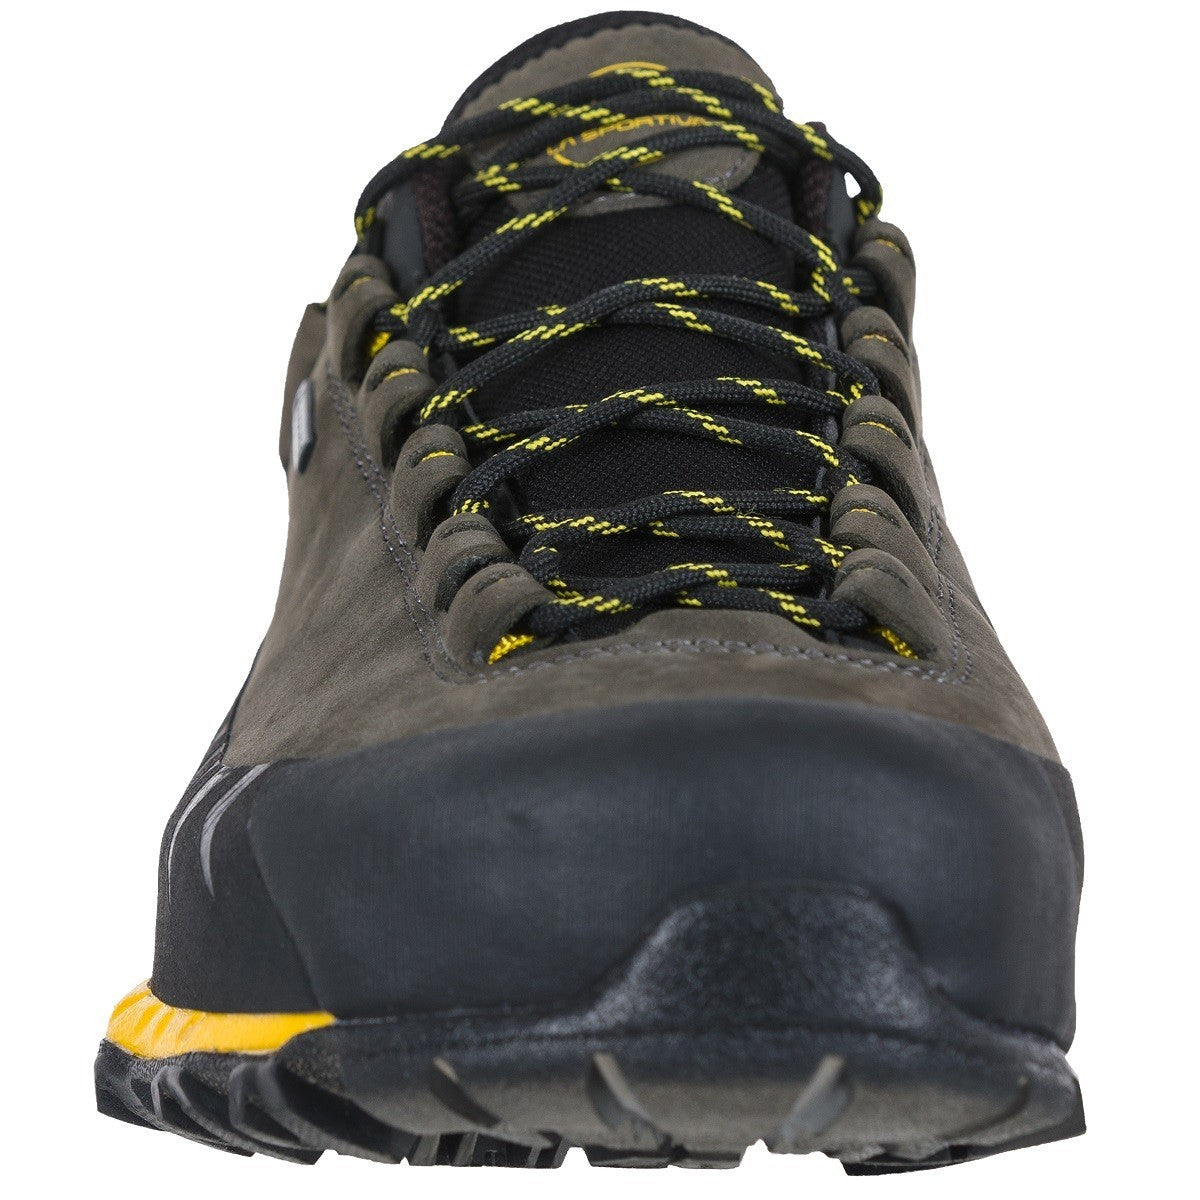 La Sportiva TX5 Low GTX in carbon/yellow. front view